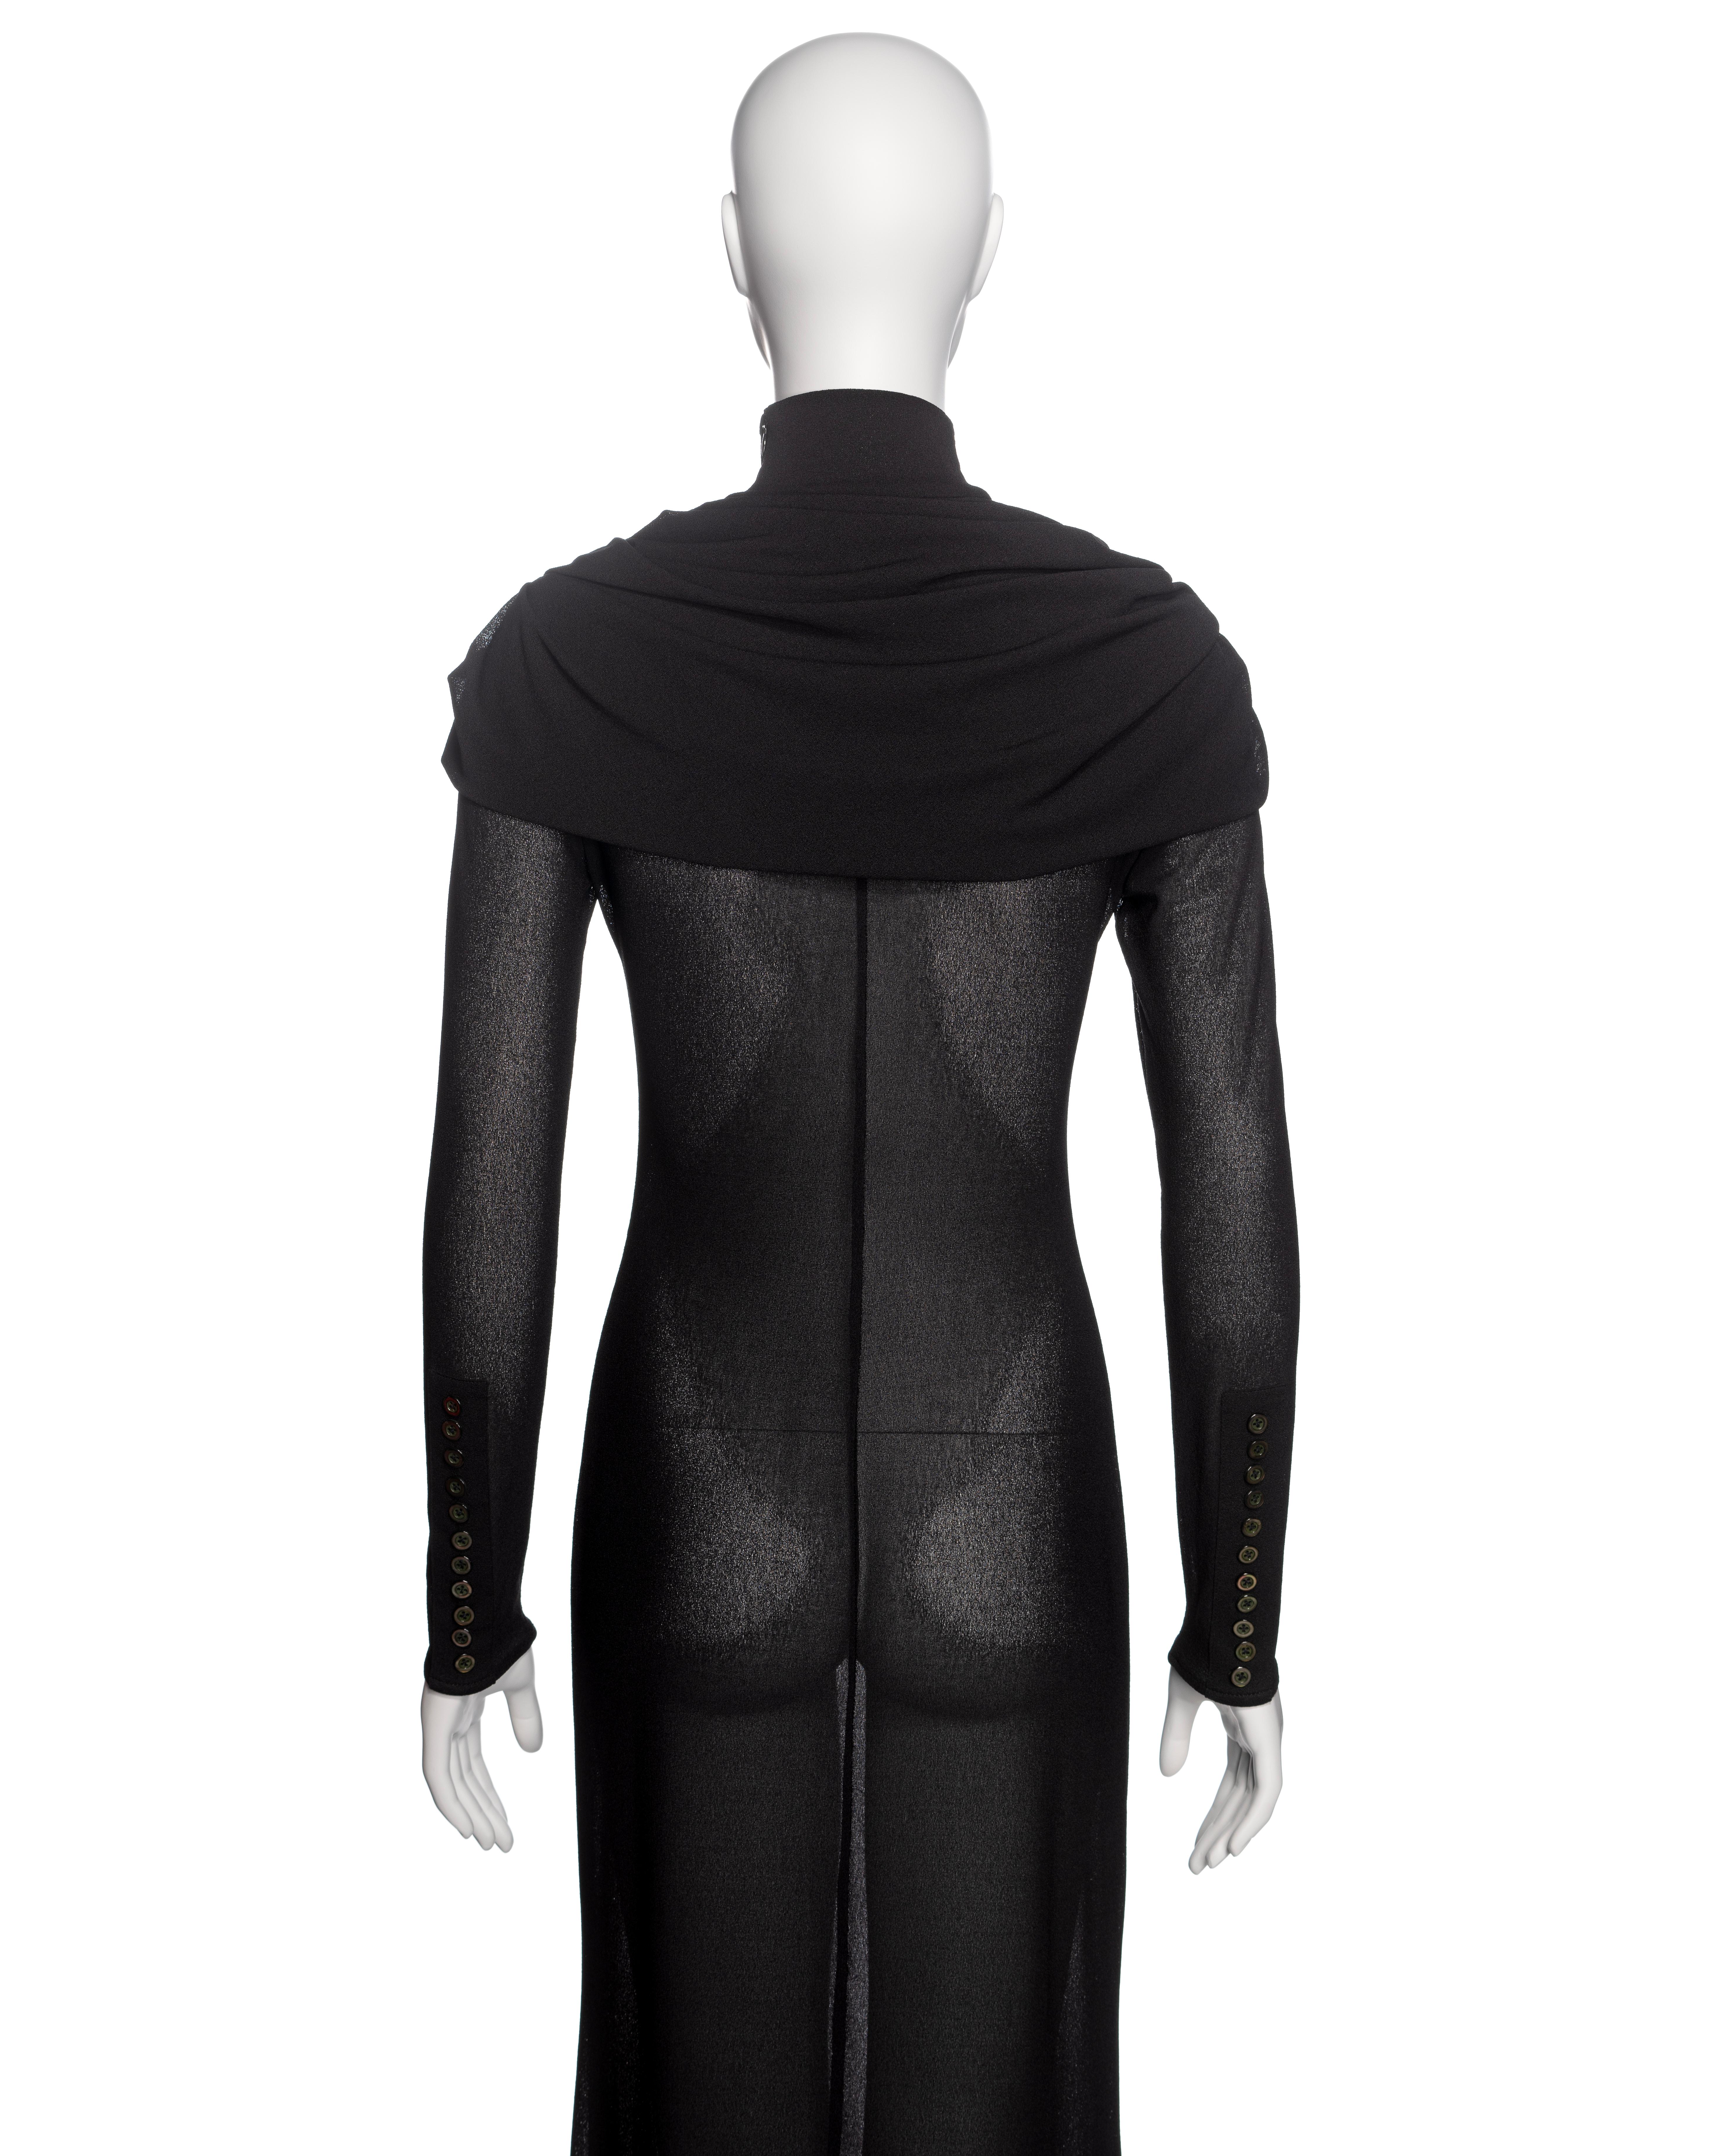 Alexander McQueen Black Mock Neck Evening Dress with Draped Cowl, 'Joan' FW 1998 For Sale 8